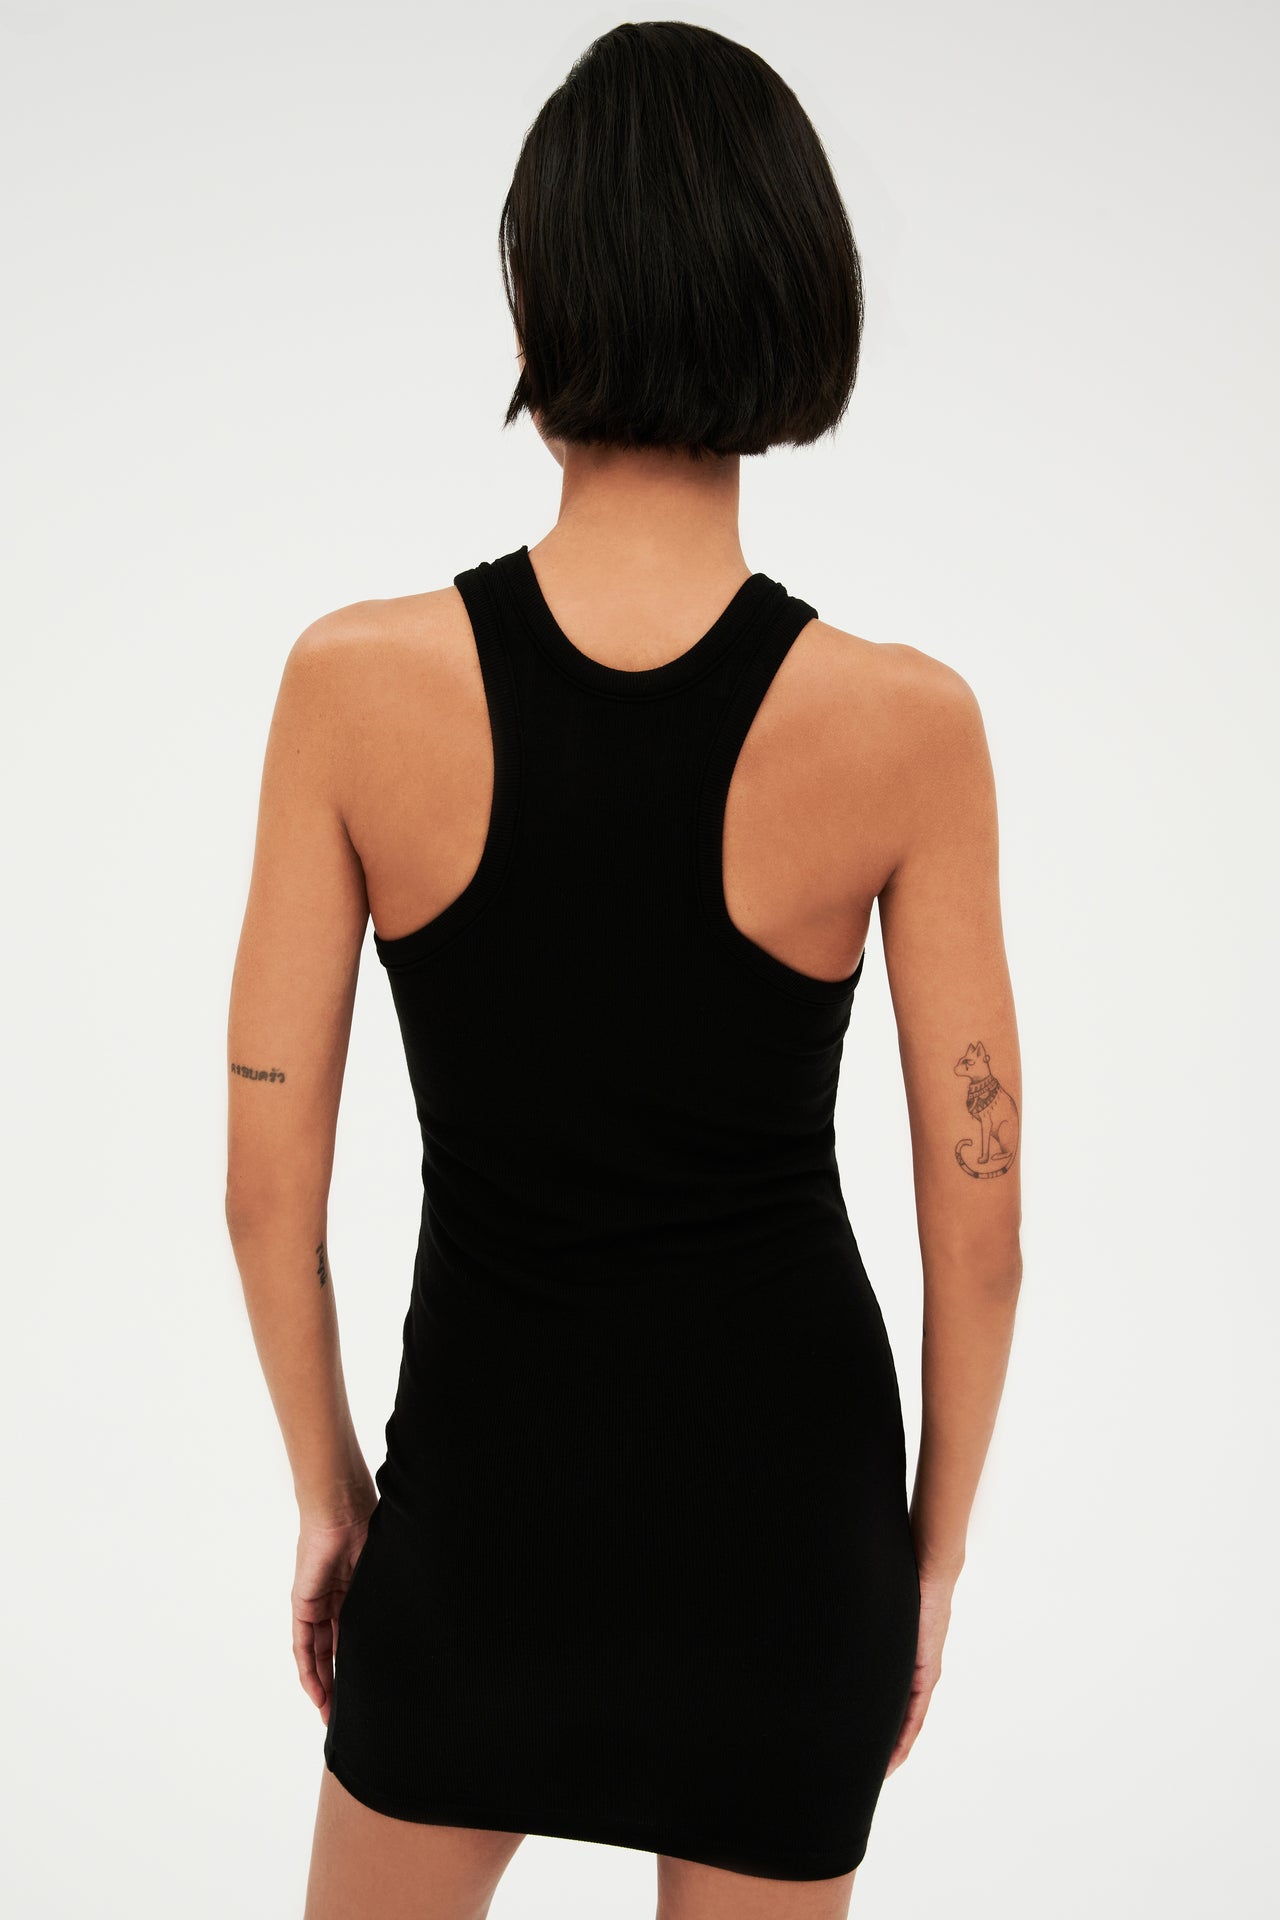 The back view of a woman wearing a SPLITS59 Kiki Rib Dress in Black perfect for summer.